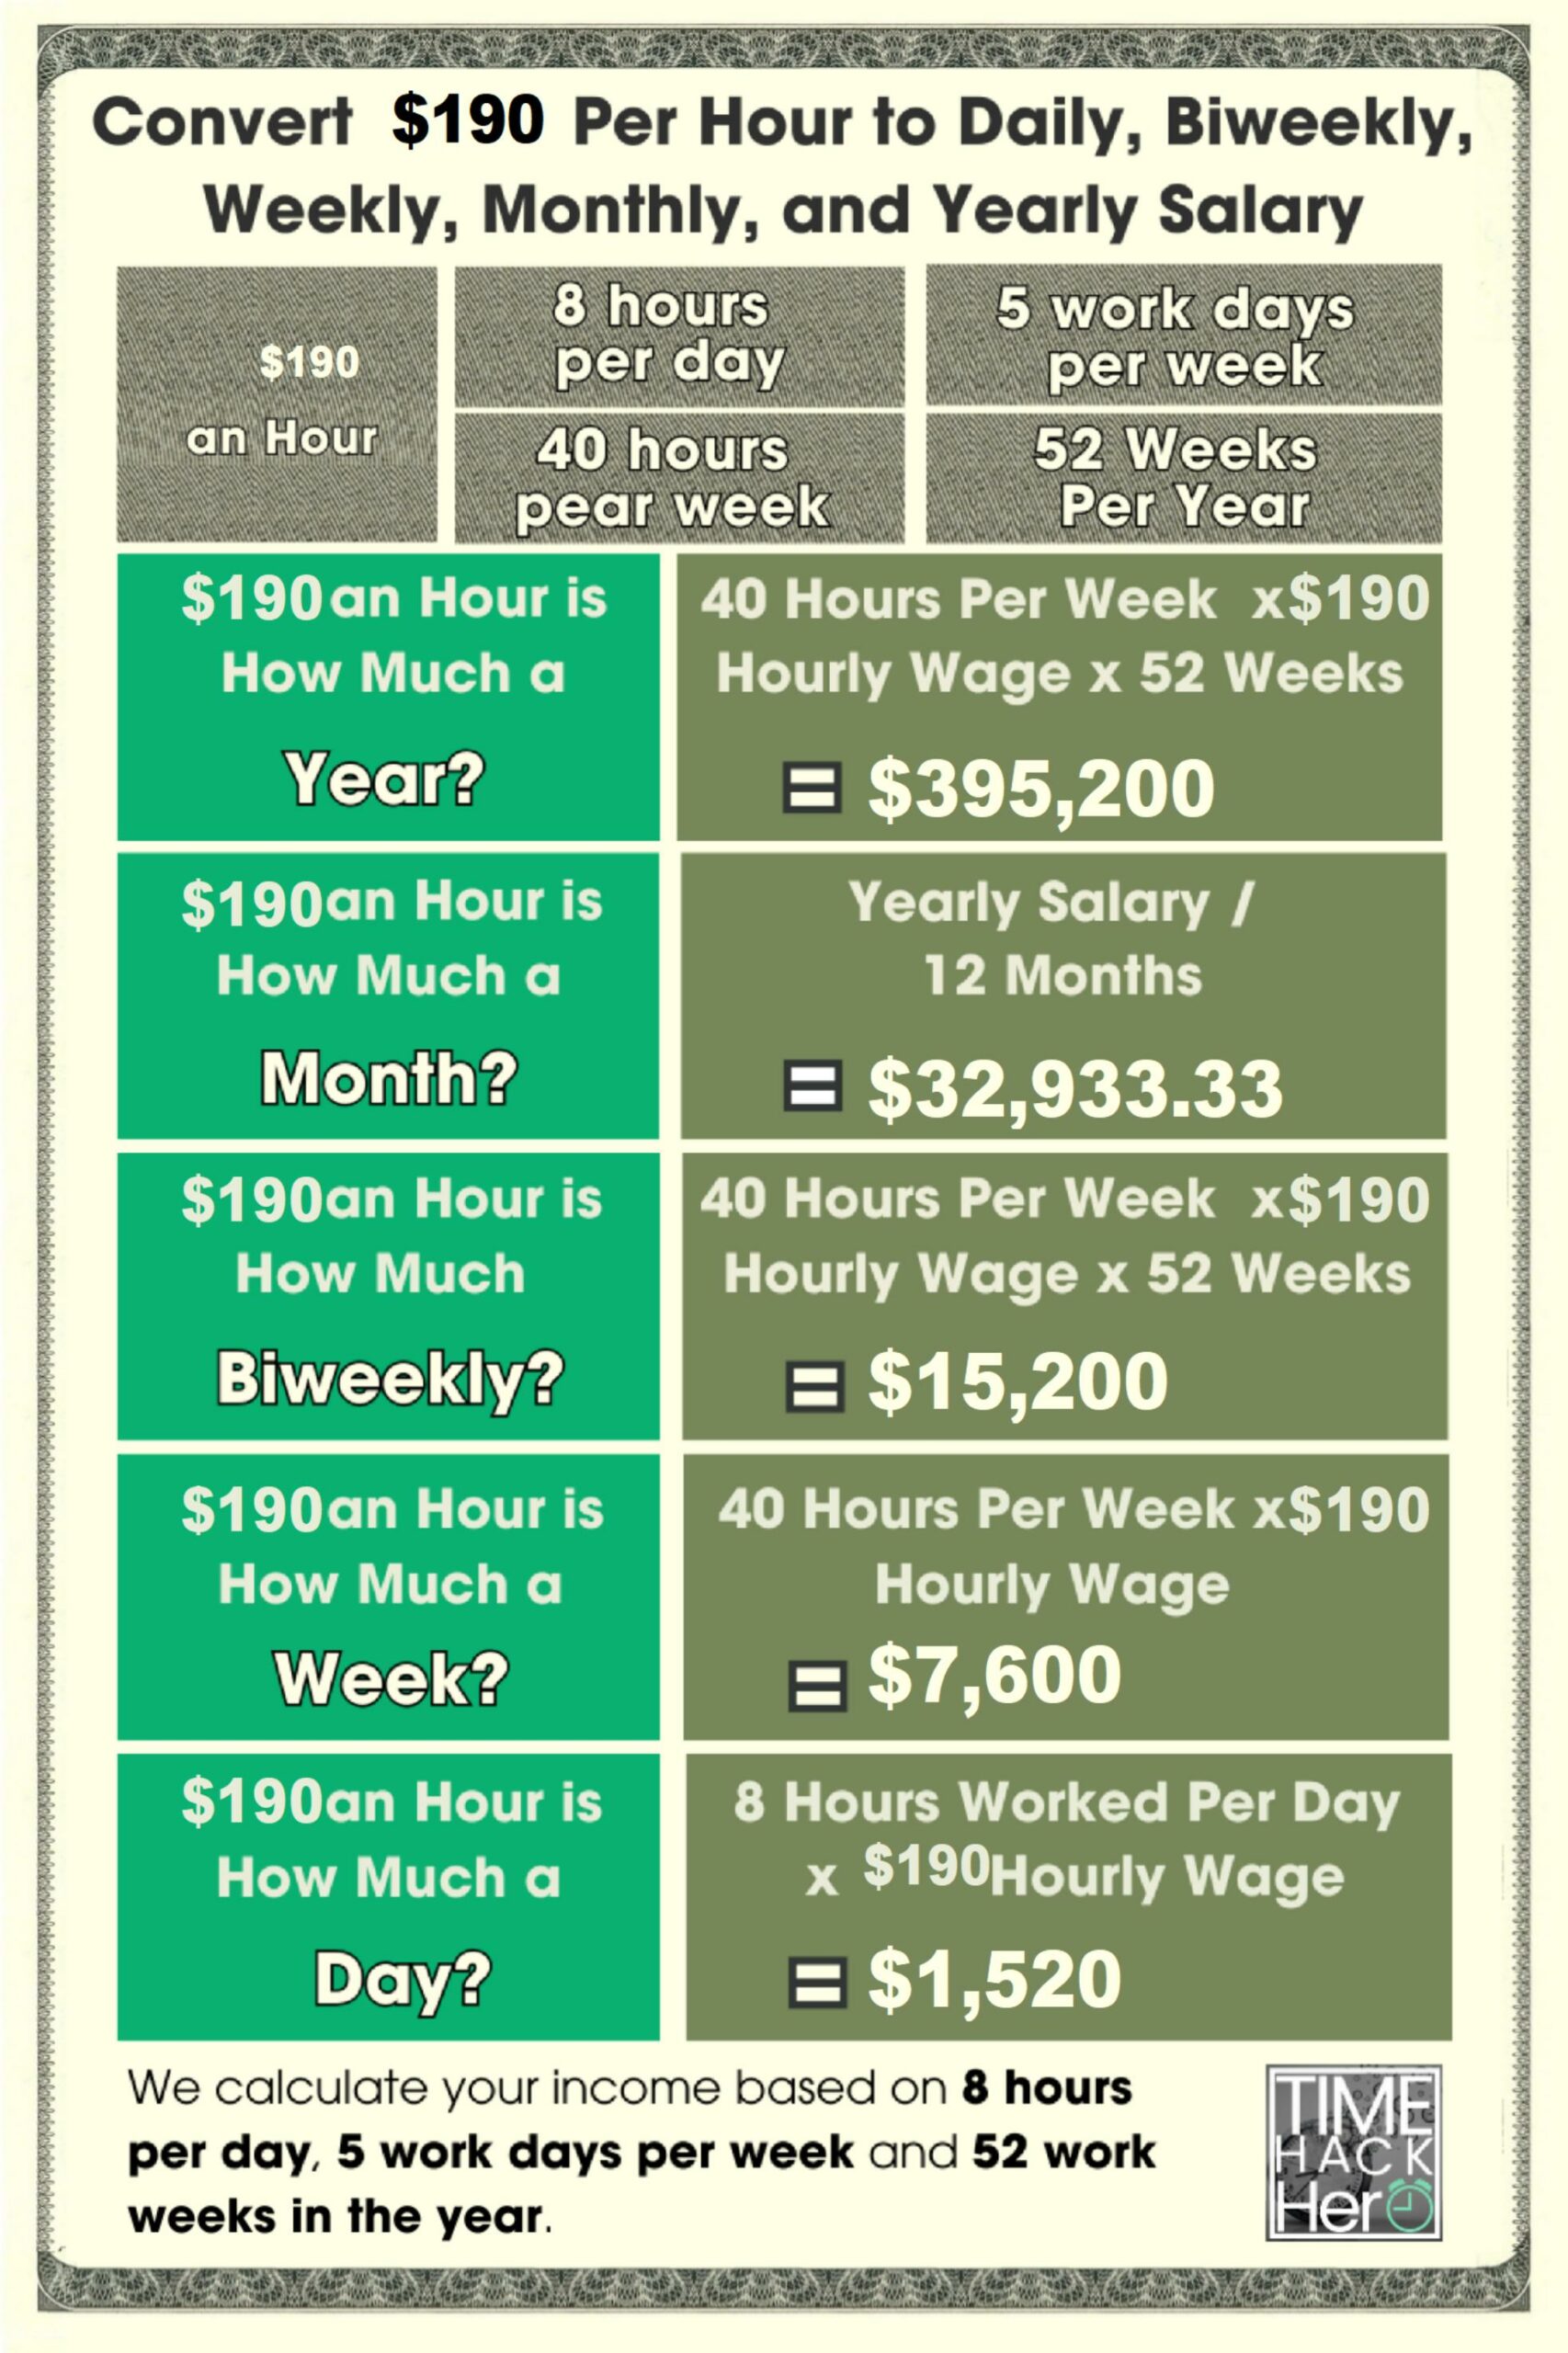 Convert $190 Per Hour to Weekly, Monthly, and Yearly Salary